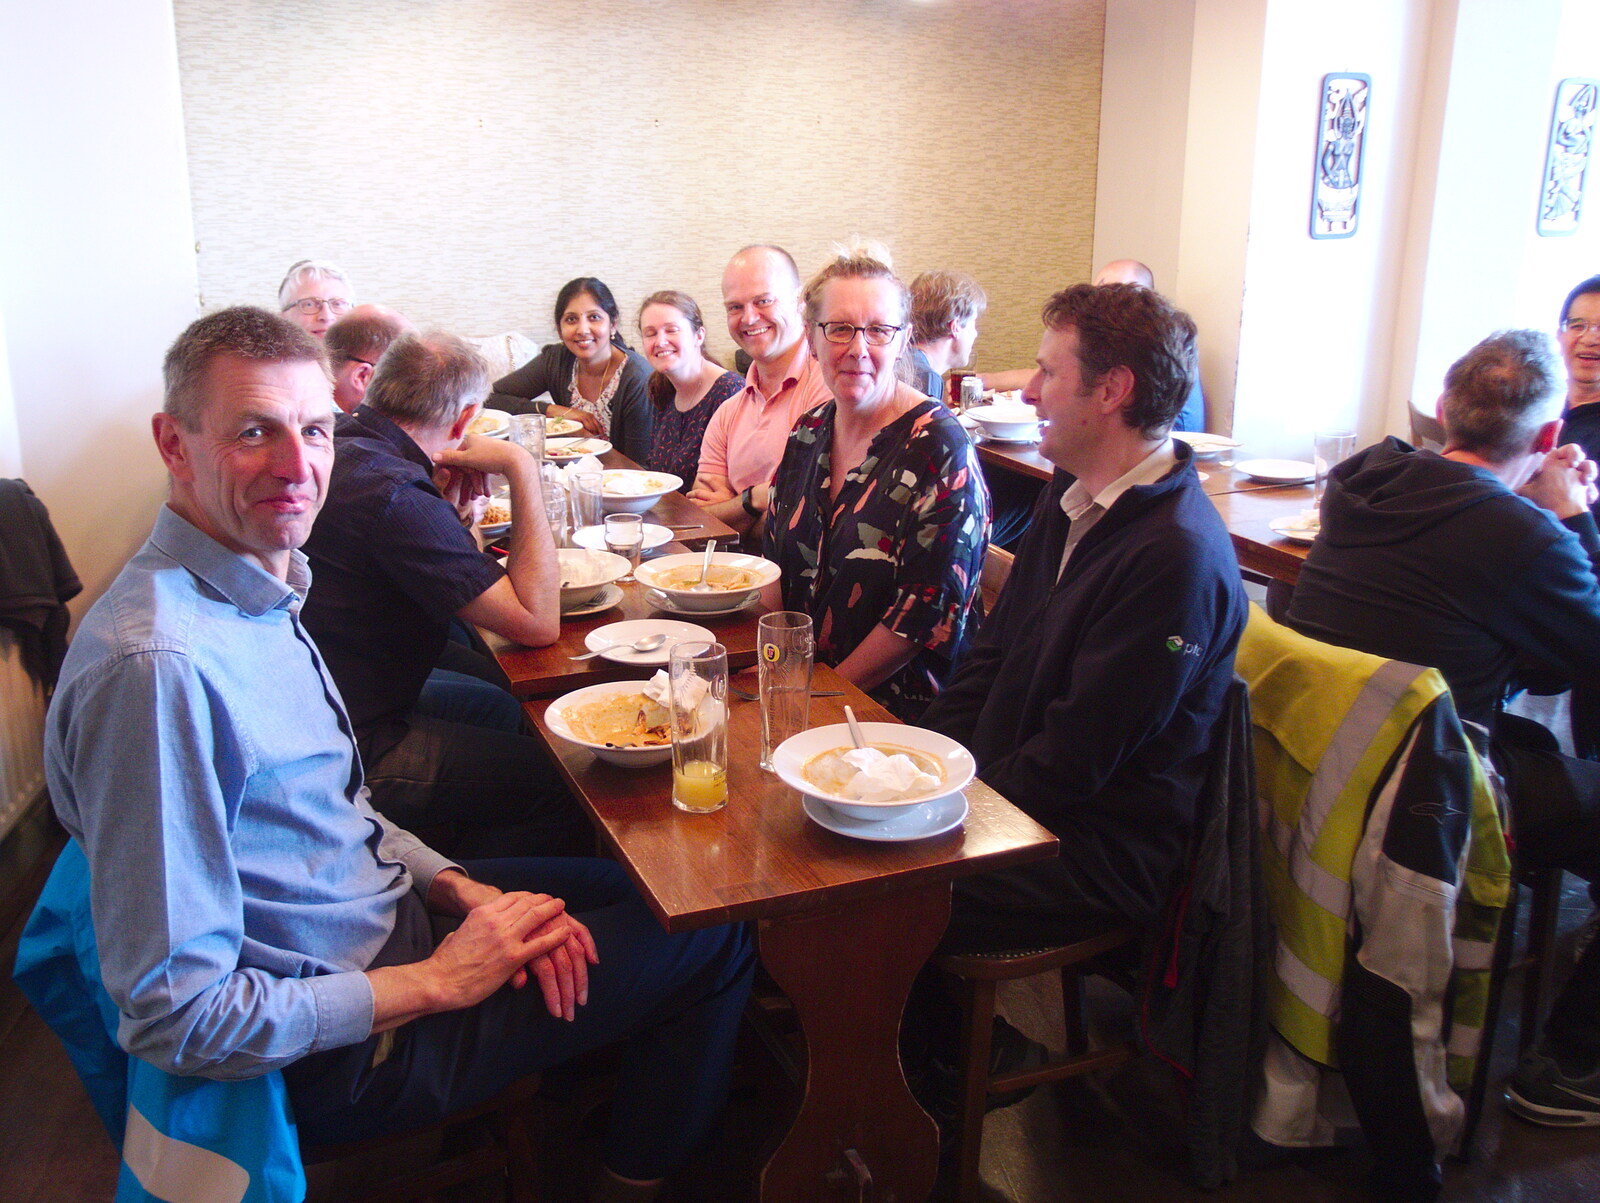 John looks over whilst ex-Qualcommers eat lunch from A Mini Qualcomm Reunion, The Wrestlers, Cambridge - 26th April 2019